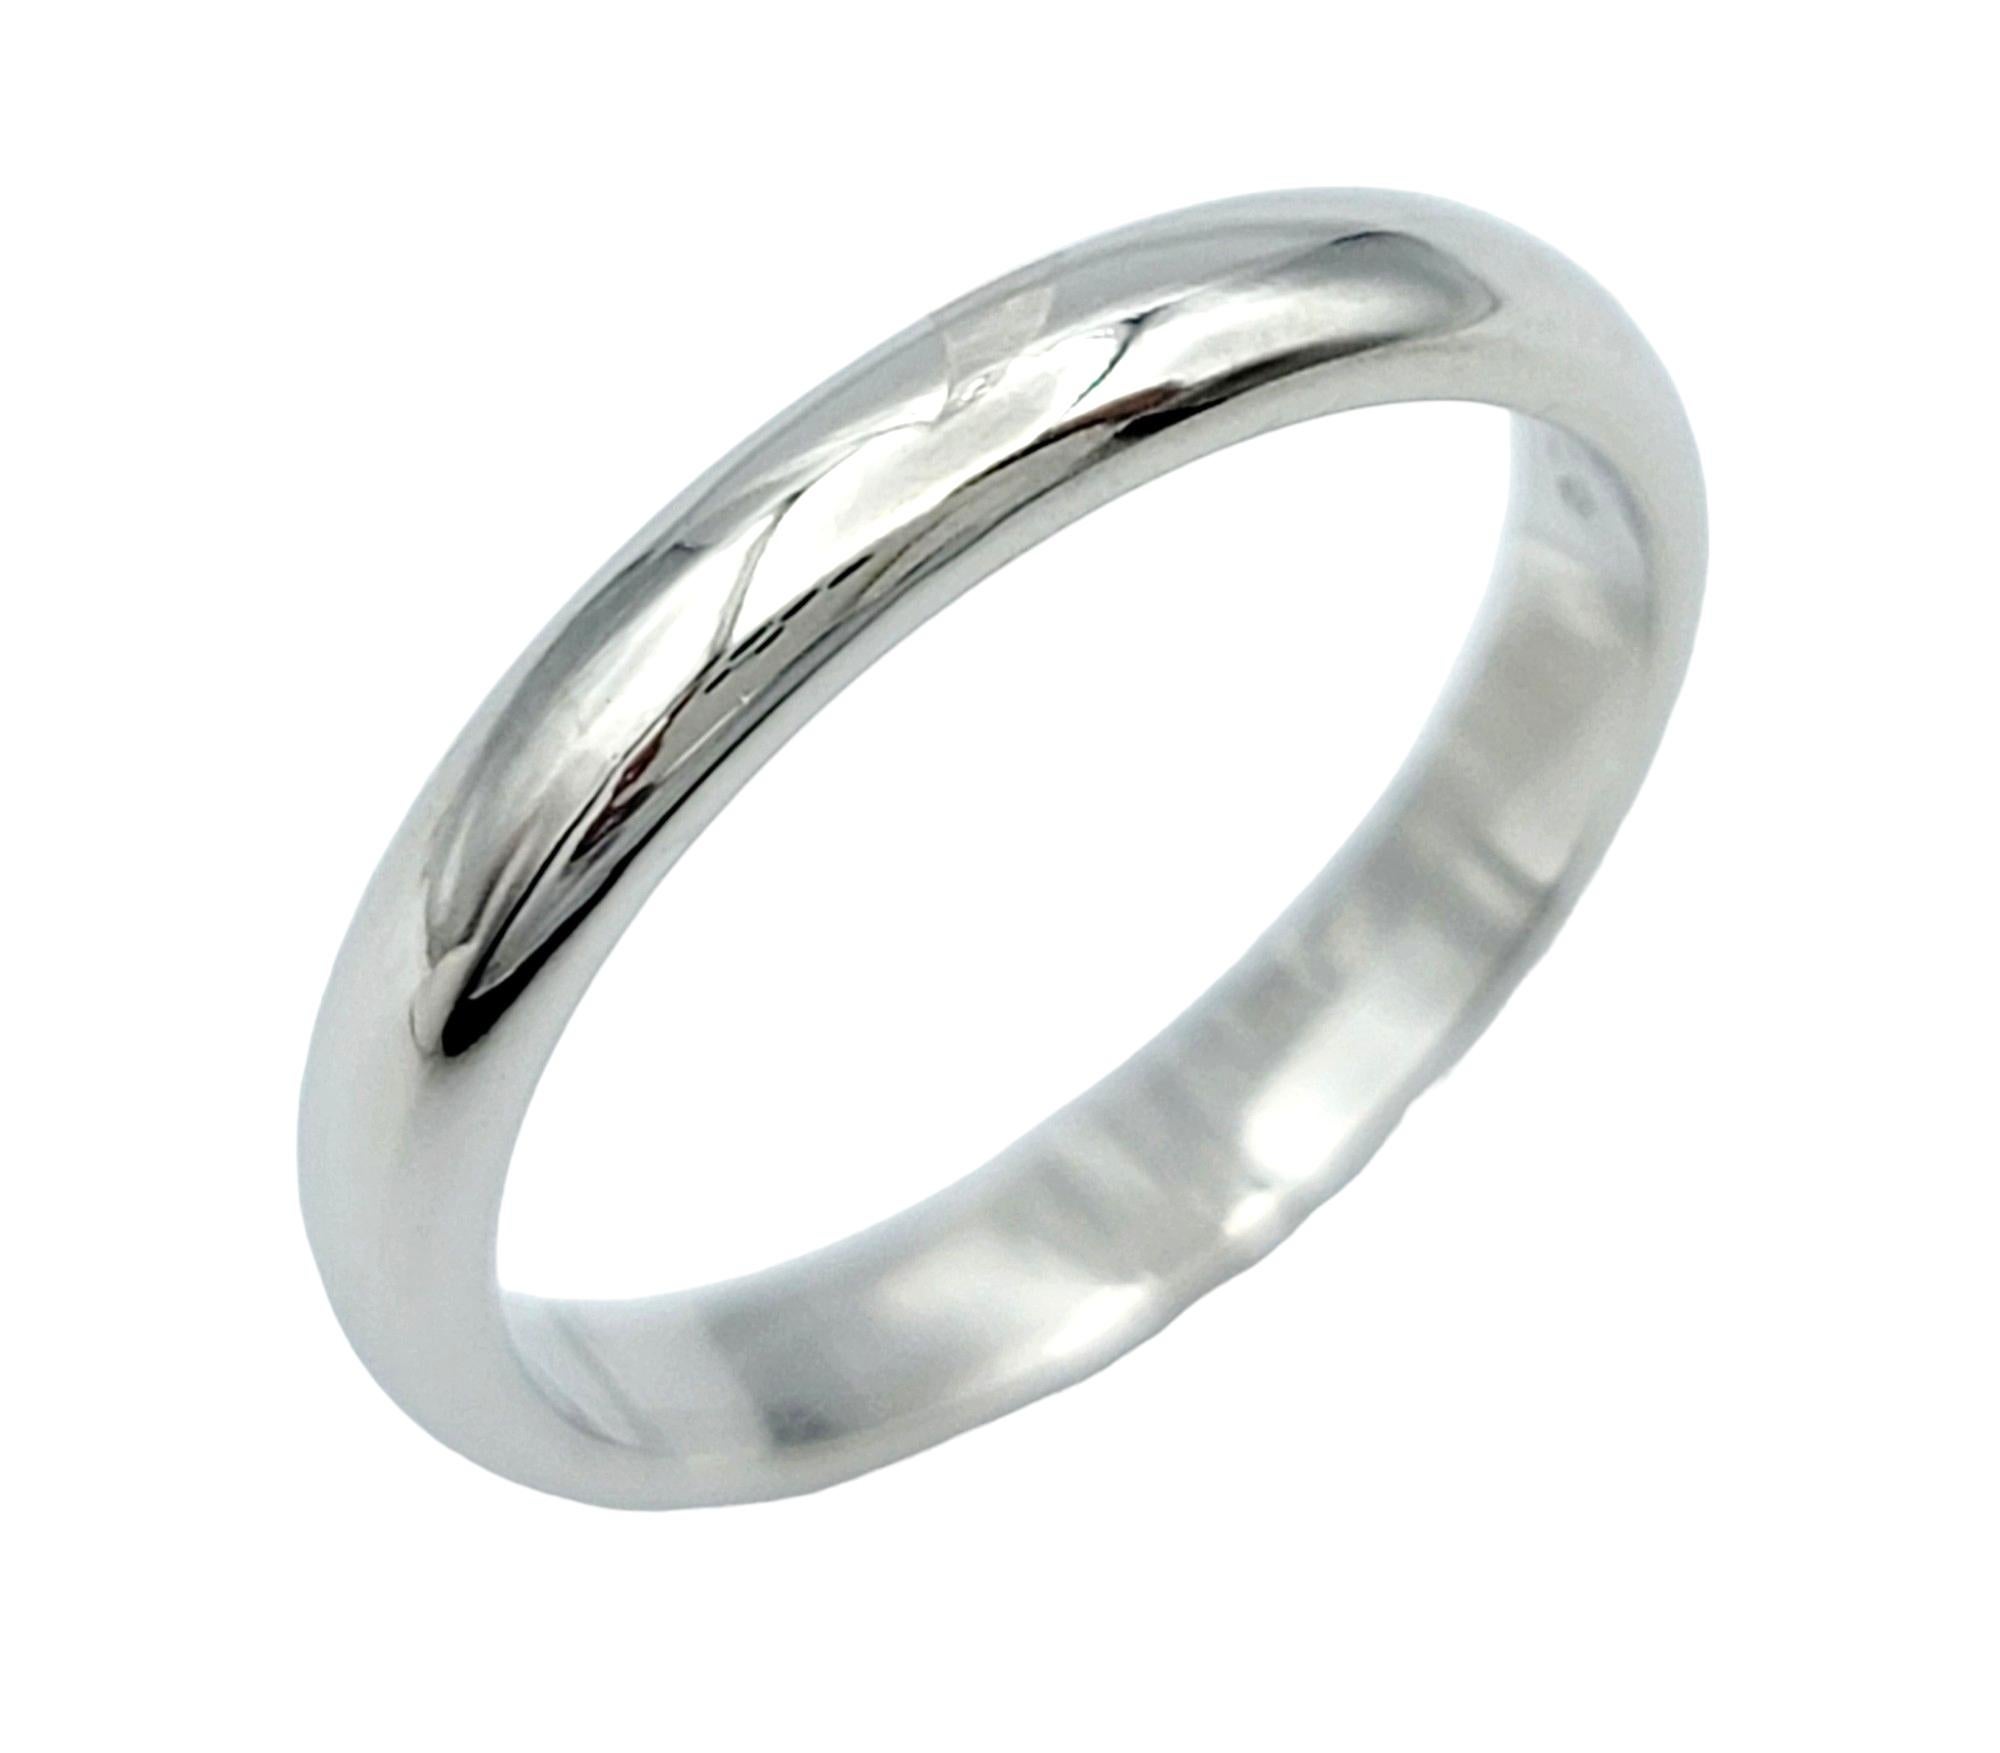 Contemporary Tiffany & Co. Tiffany Forever Wedding Band Ring Set in Polished Platinum For Sale